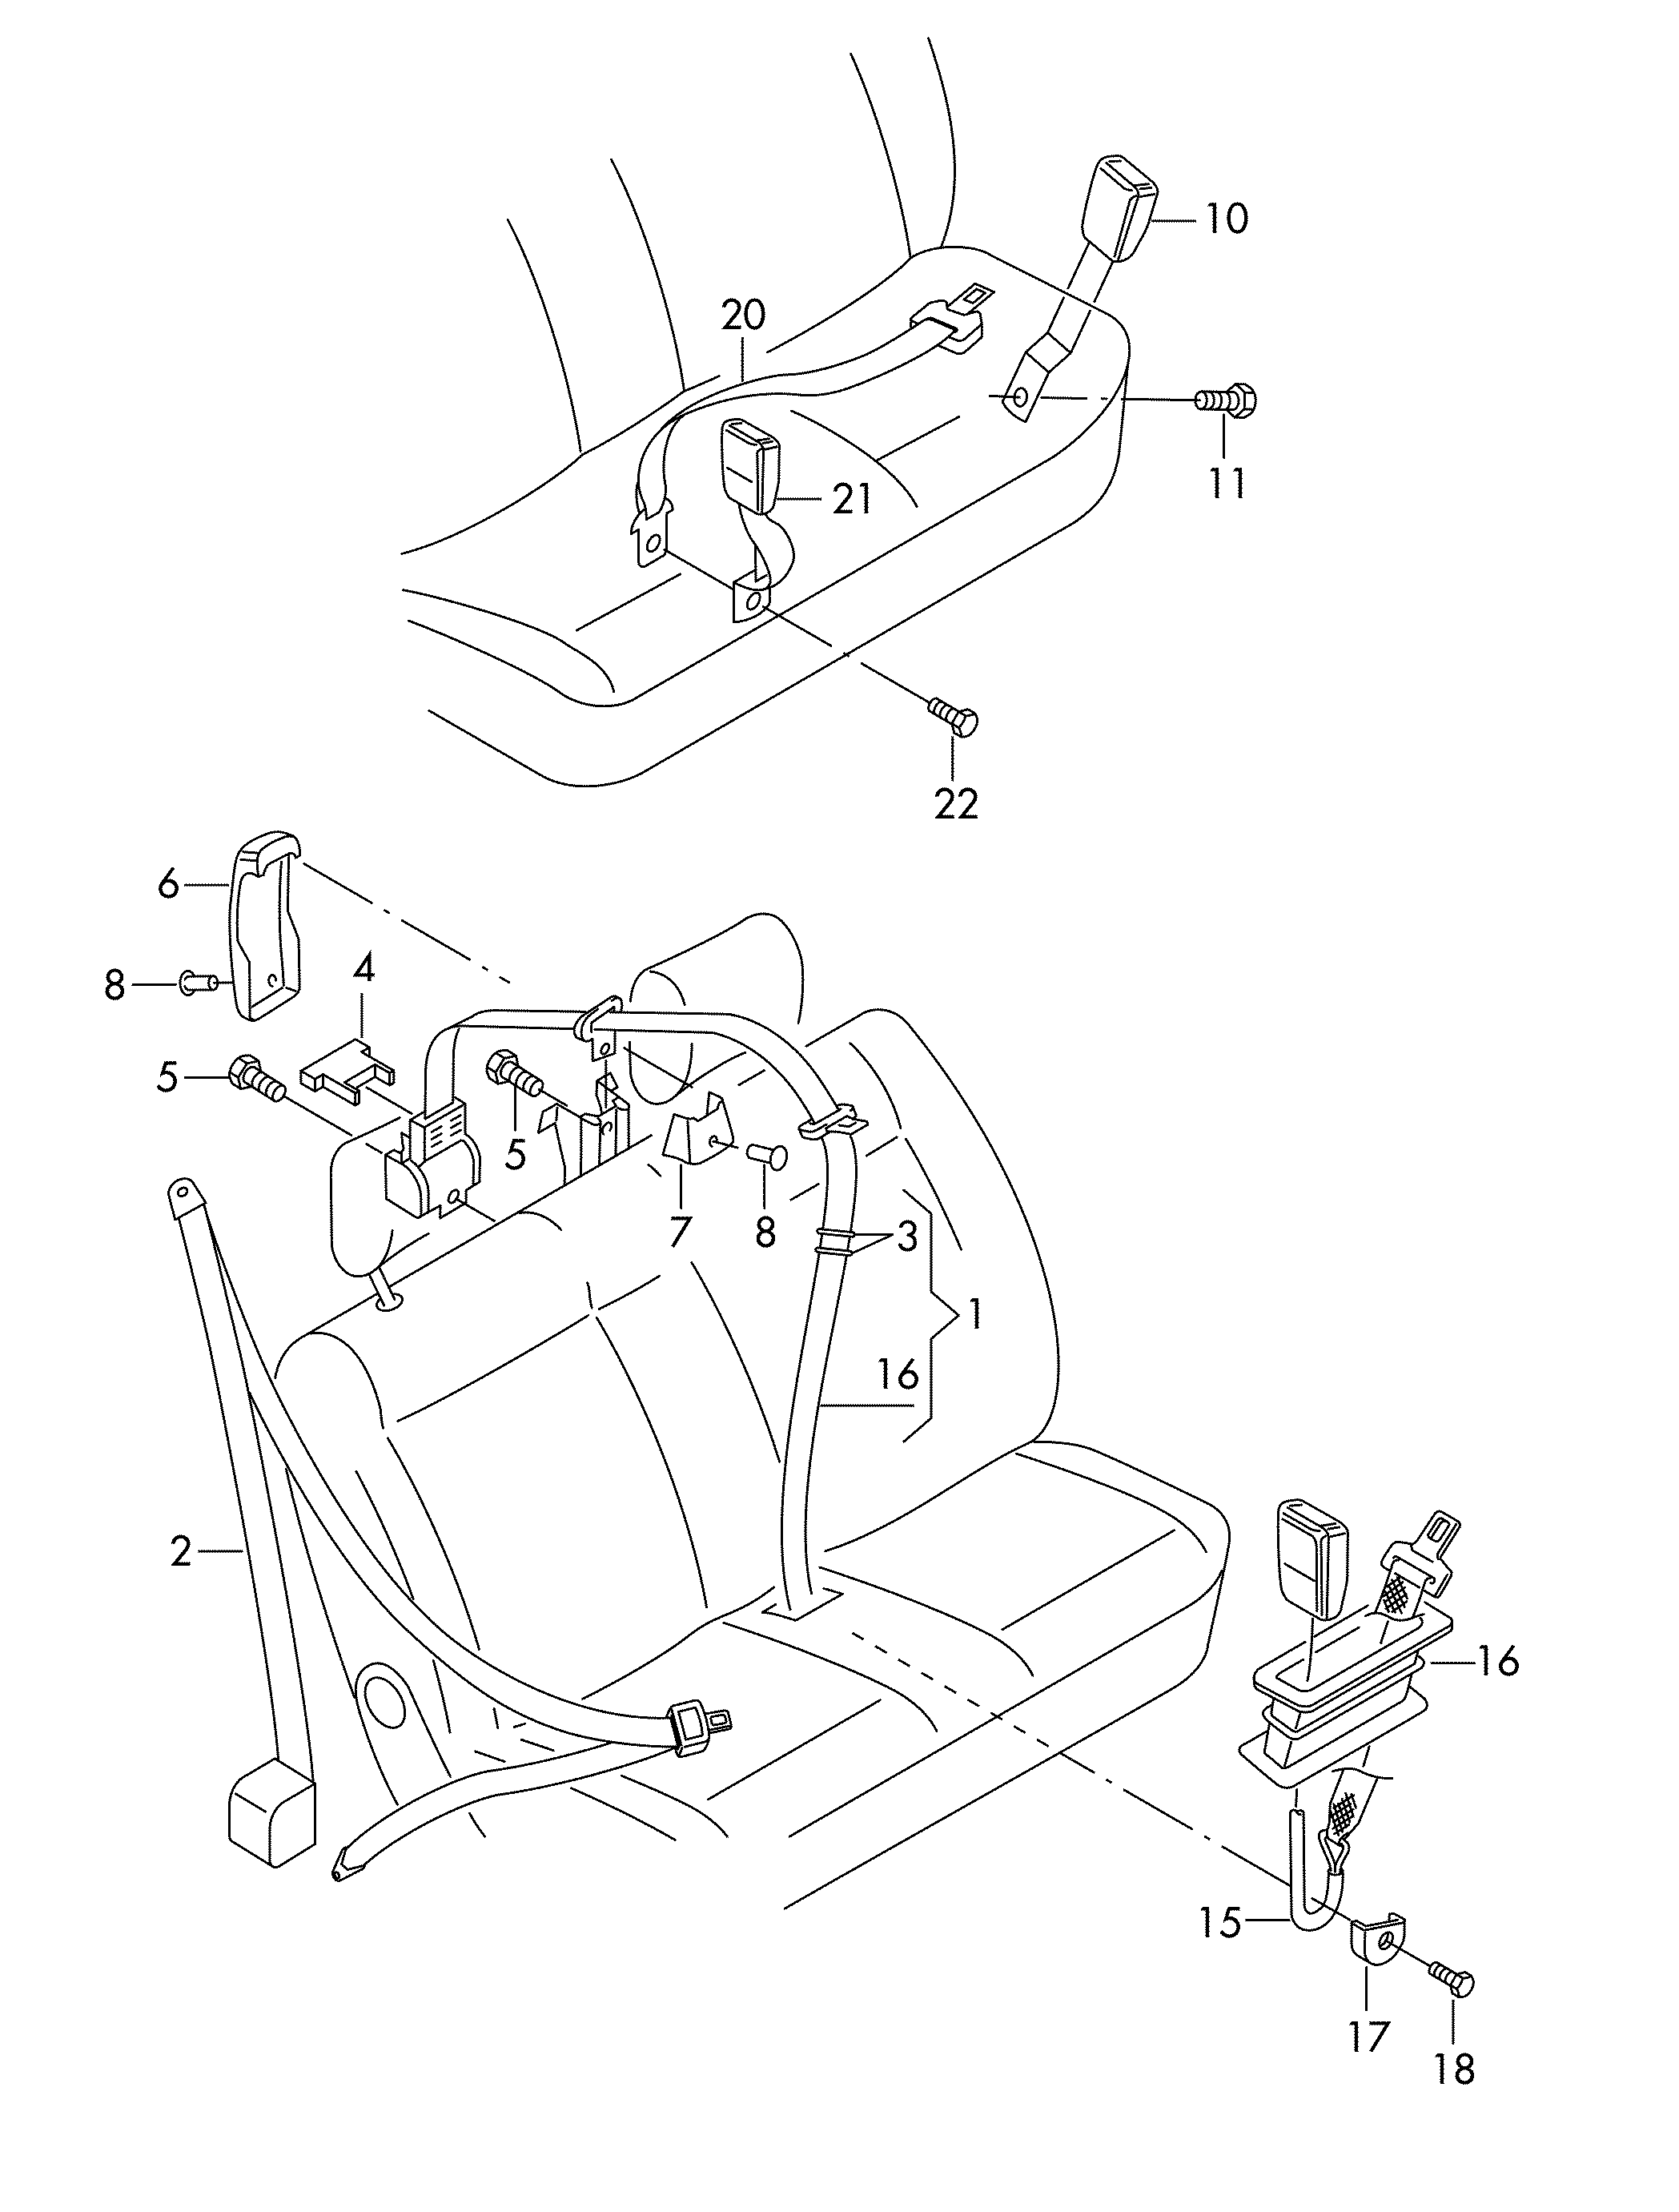 seat belts in
cab; for dual passenger seat - Transporter(TR)  